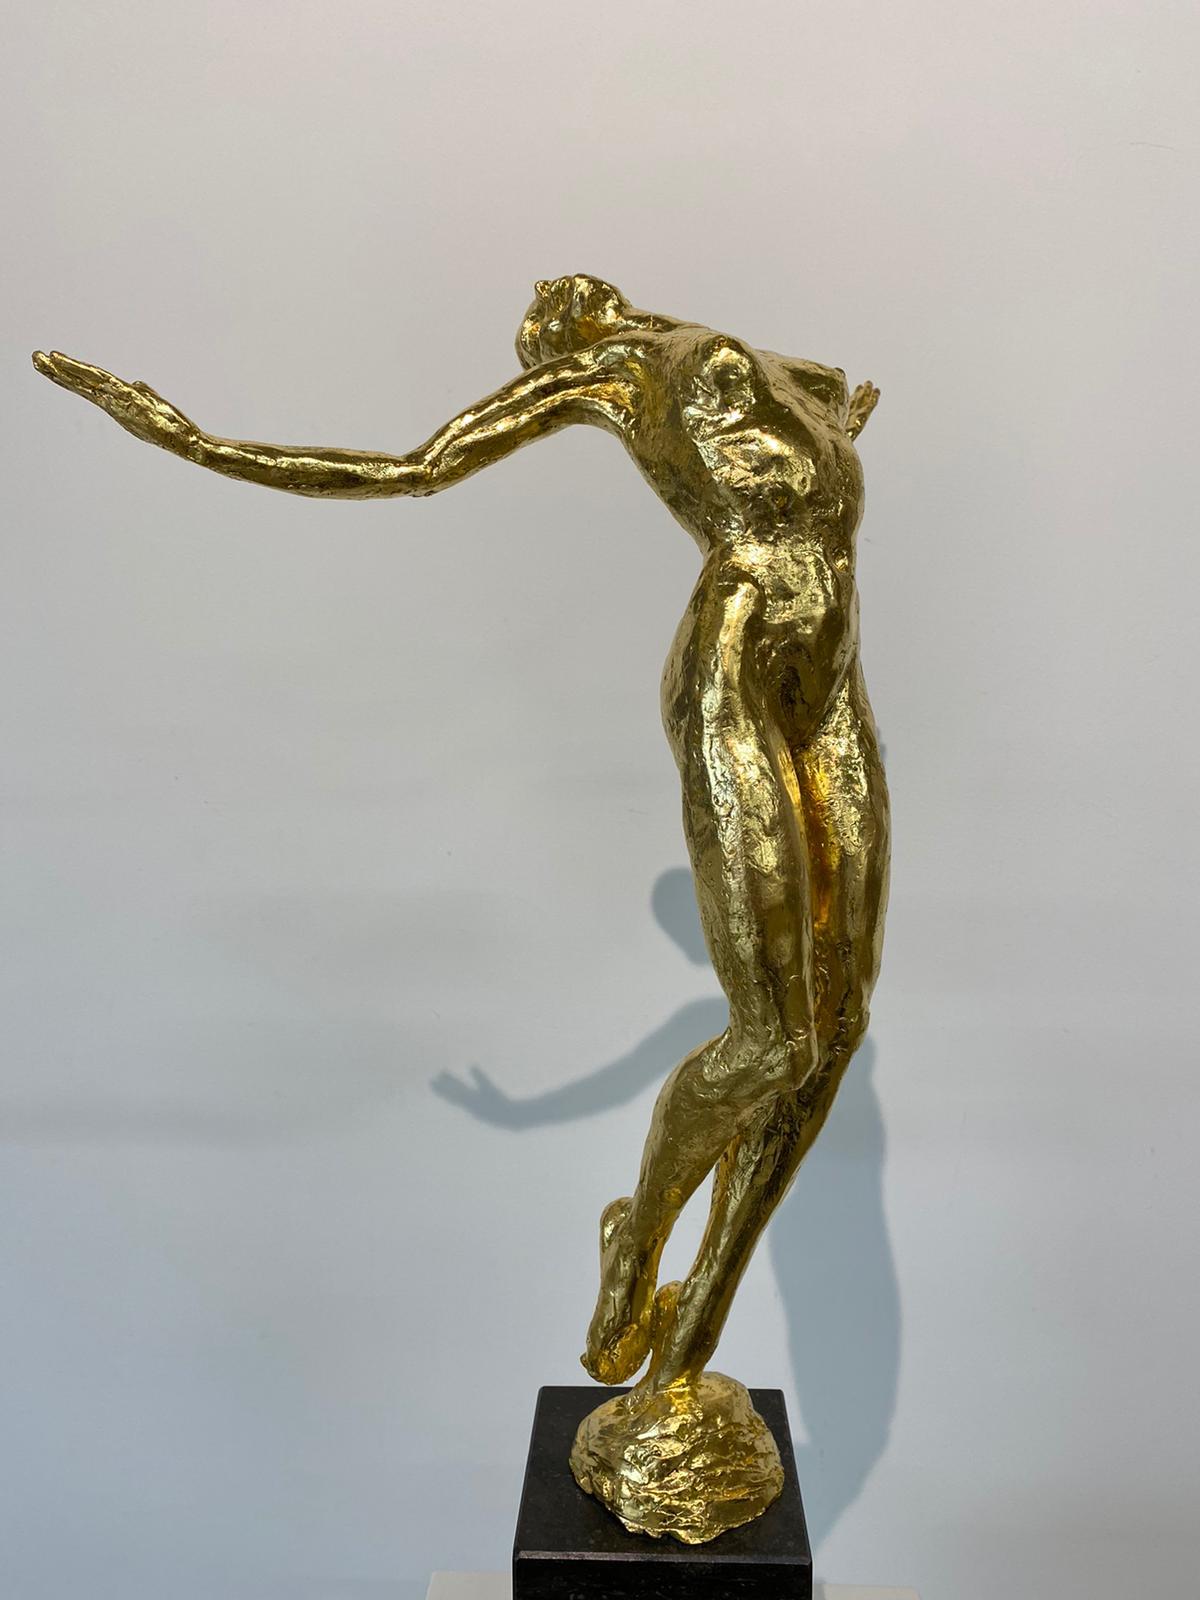 Living Daylight Gold- 21st Century Sculpture of a nude woman  6